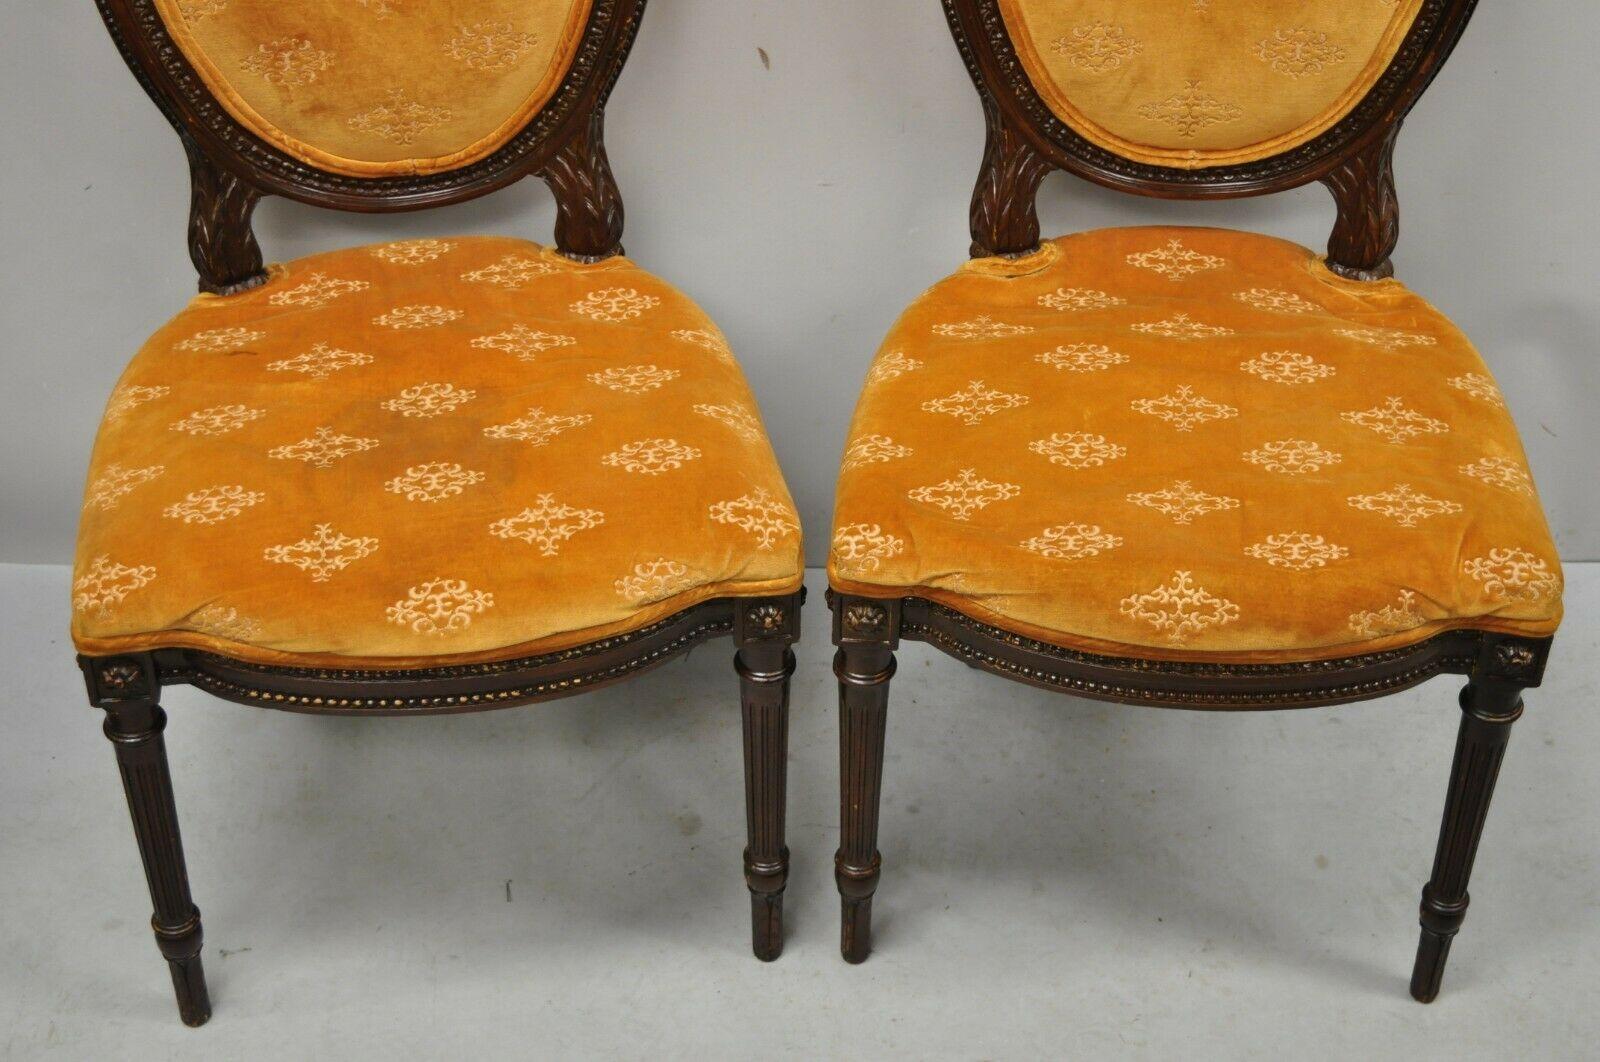 Italian Vintage French Louis XVI Style Carved Wood Oval Back Dining Side Chairs - a Pair